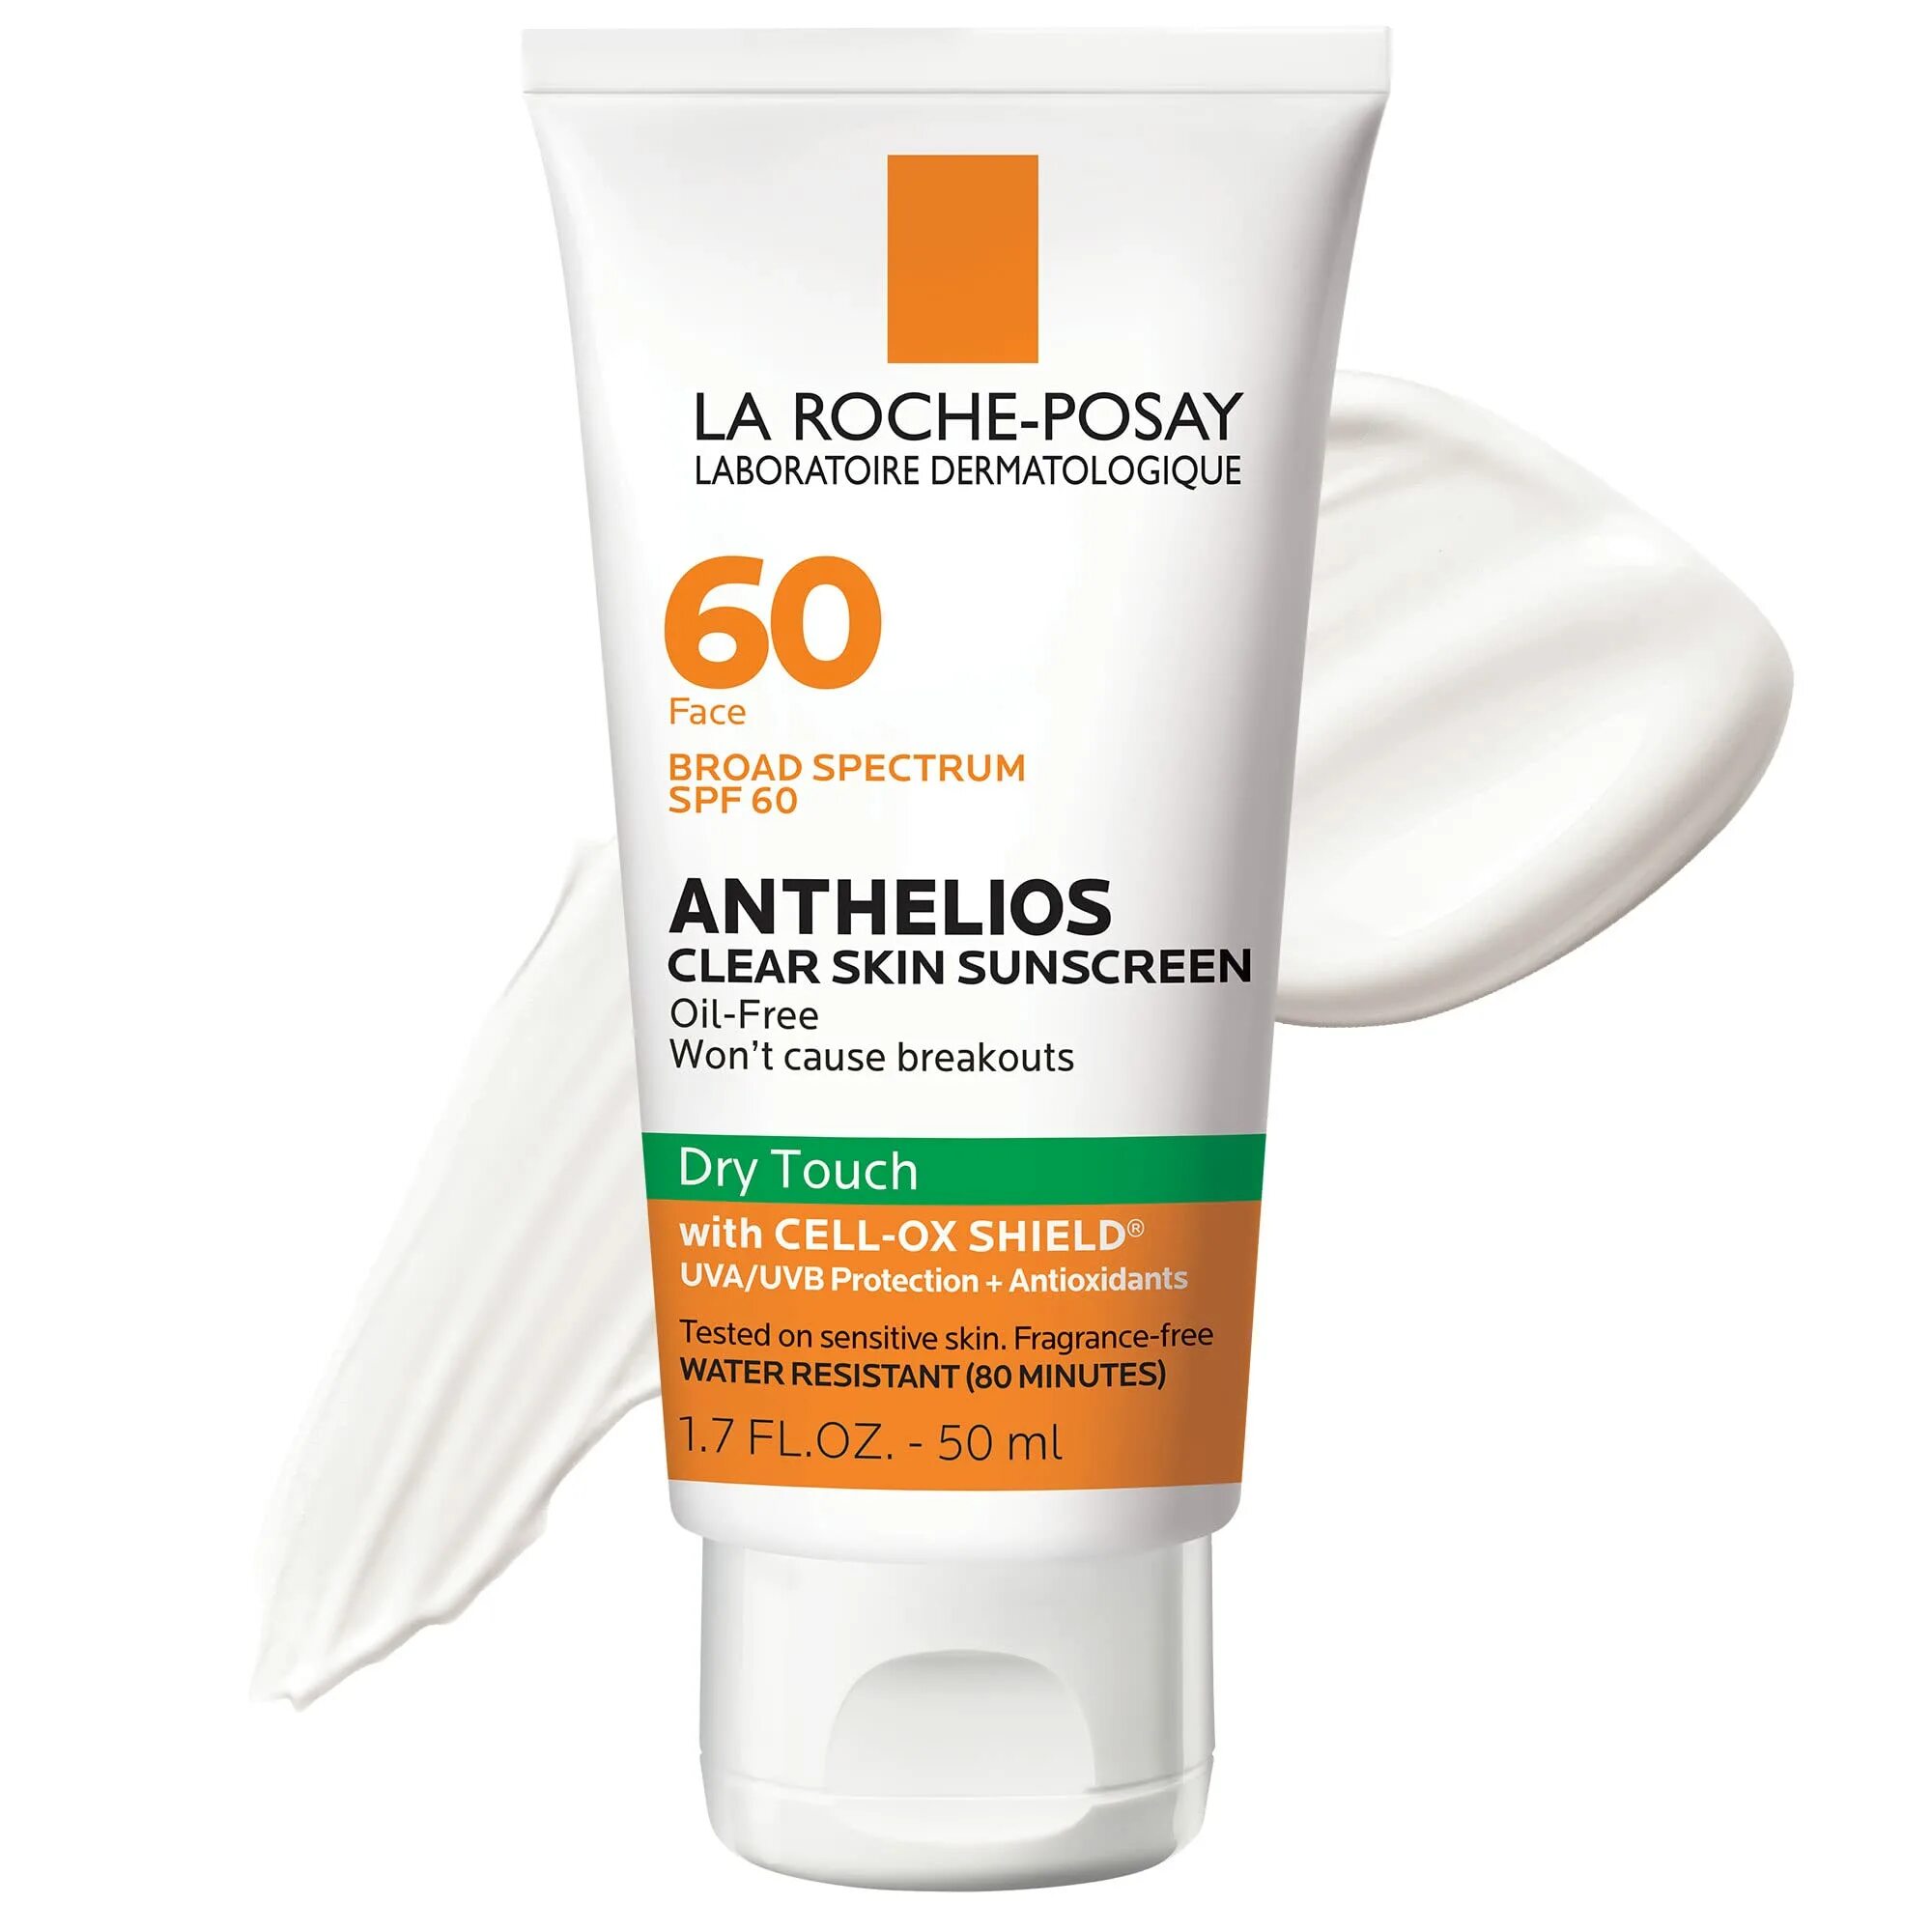 La Roche-Posay Anthelios Clear Skin Dry Touch Sunscreen SPF 60. Солнцезащитный крем 100 СПФ. La Roche-Posay Anthelios солнцезащитный крем для лица SPF 50, 50 мл. La Roche-Posay солнцезащитный "Anthelios 100 ka+". Крем спф летом